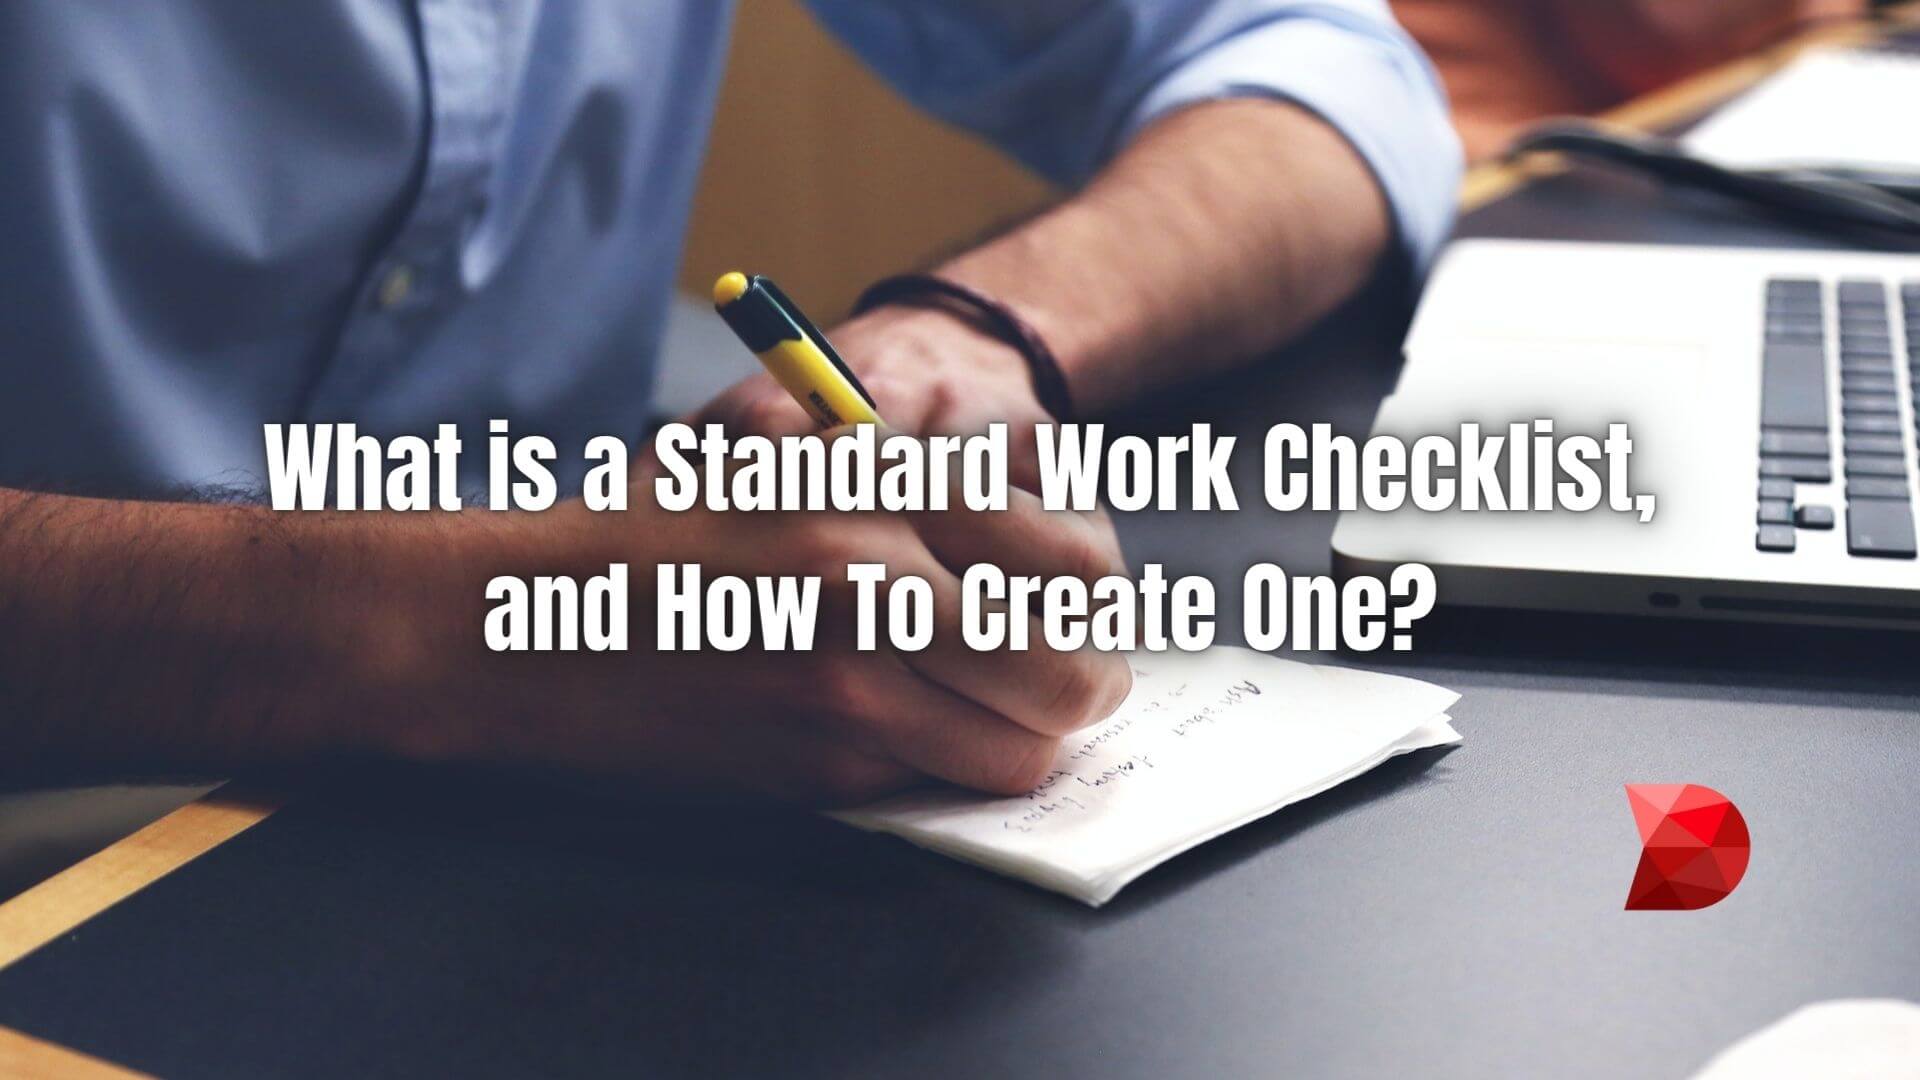 A Standard Work Checklist includes a list and detailed instructions to complete a task. Here's how to start with an automated checklist.